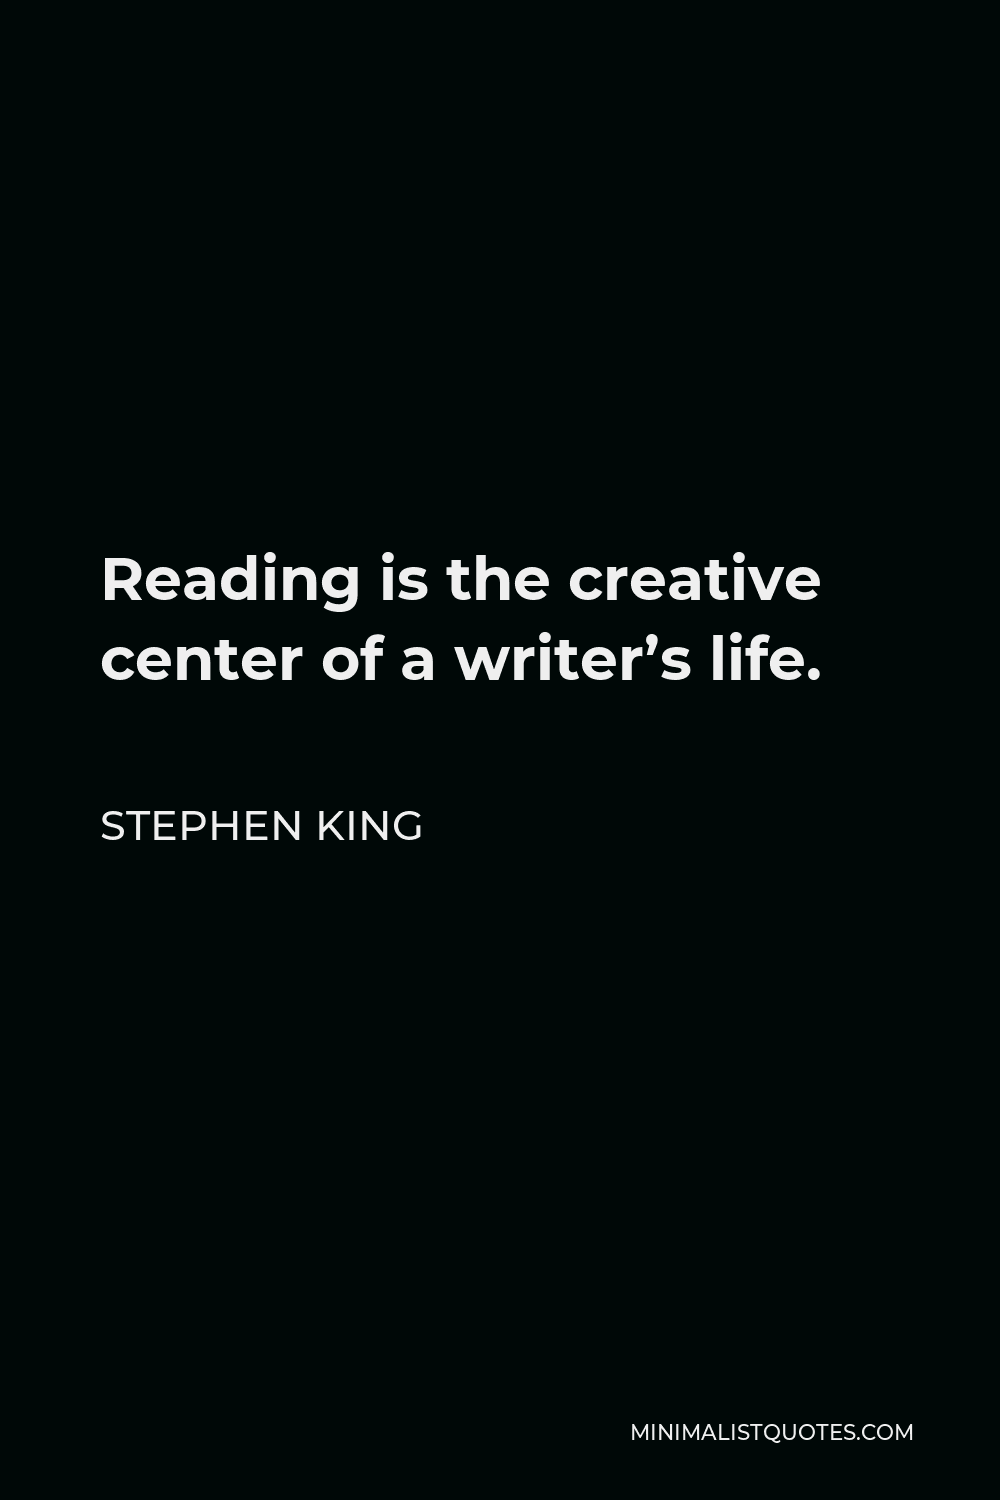 Stephen King Quote - Reading is the creative center of a writer’s life.